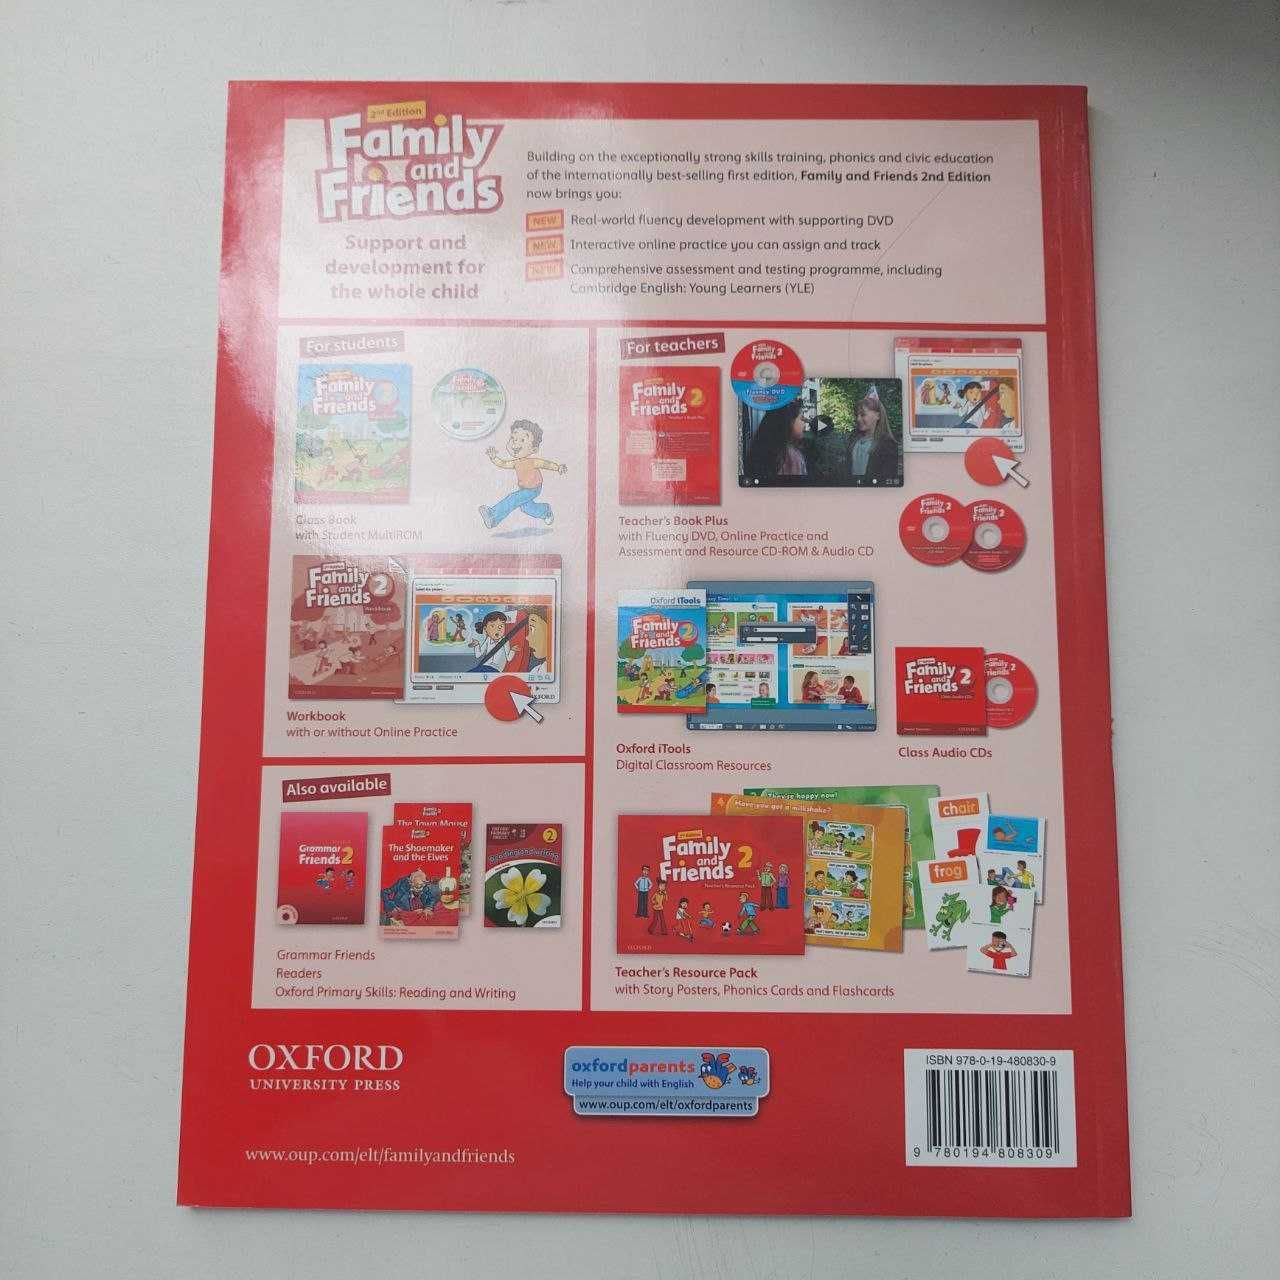 Підручник Family and Friends 2nd Edition 2 Class Book